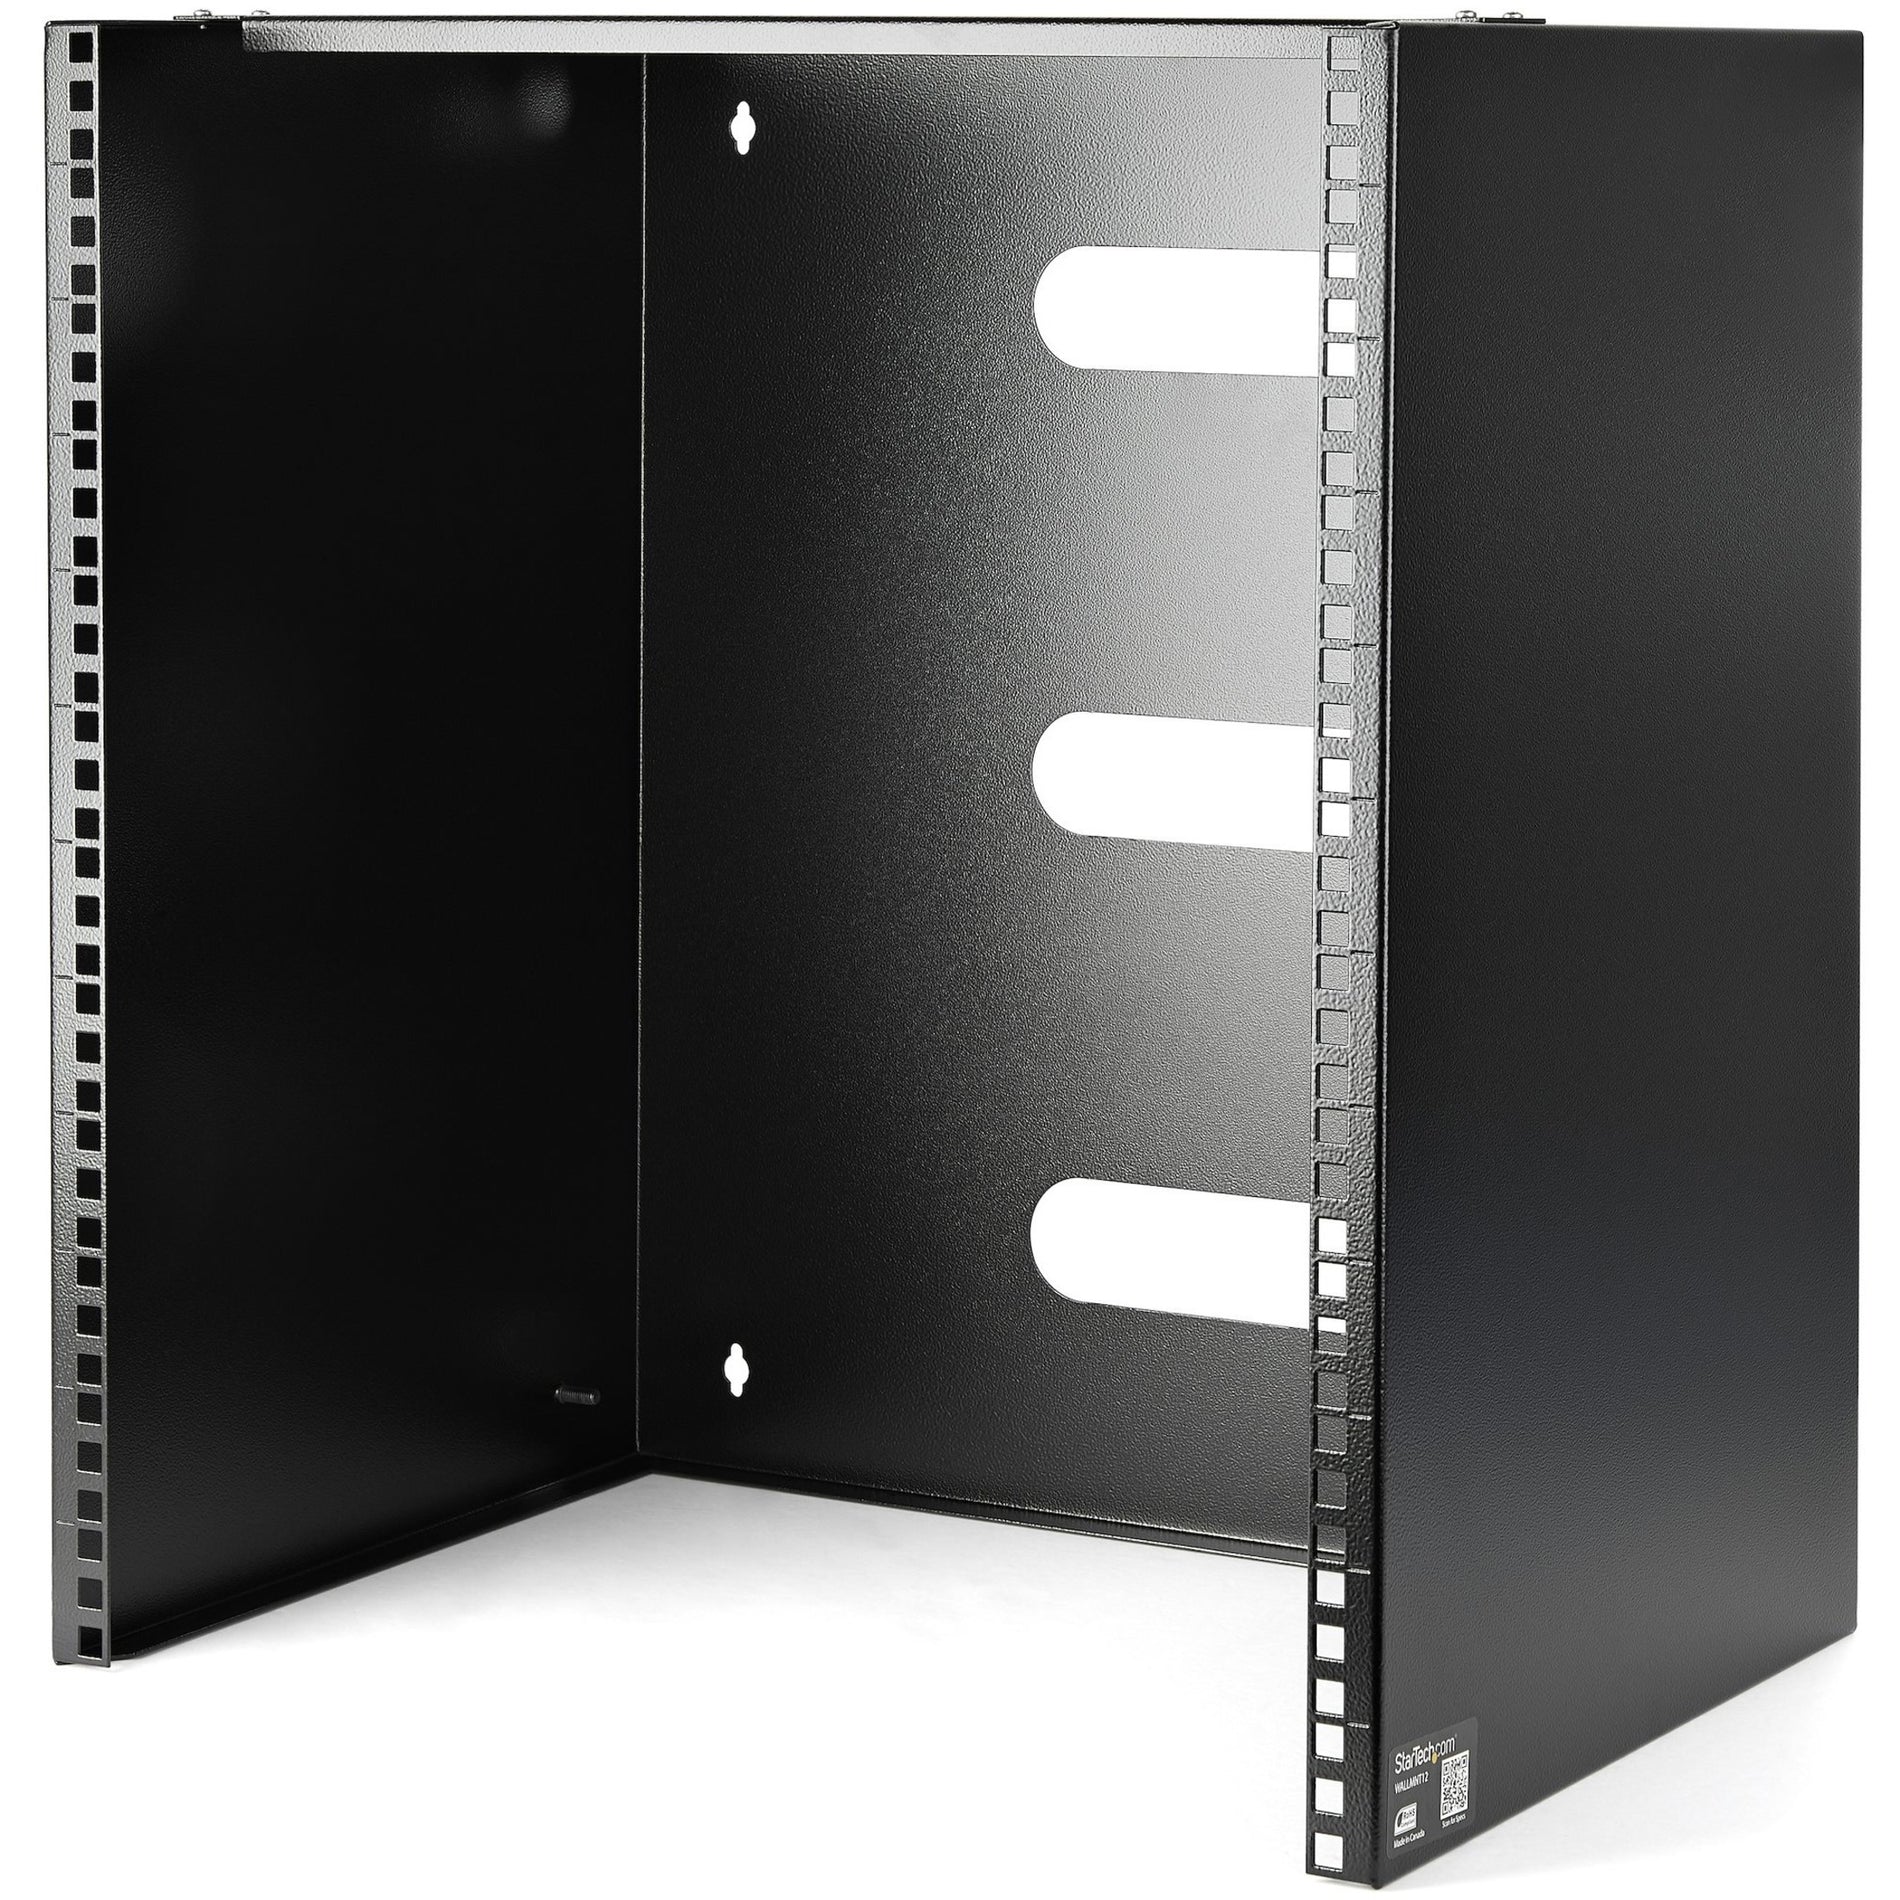 StarTech.com WALLMNT12 12U Wall-Mount Bracket for Shallow Rack-Mount Equipment - Solid Steel, Mount Patch Panels or Network Switches up to 12 inches Deep